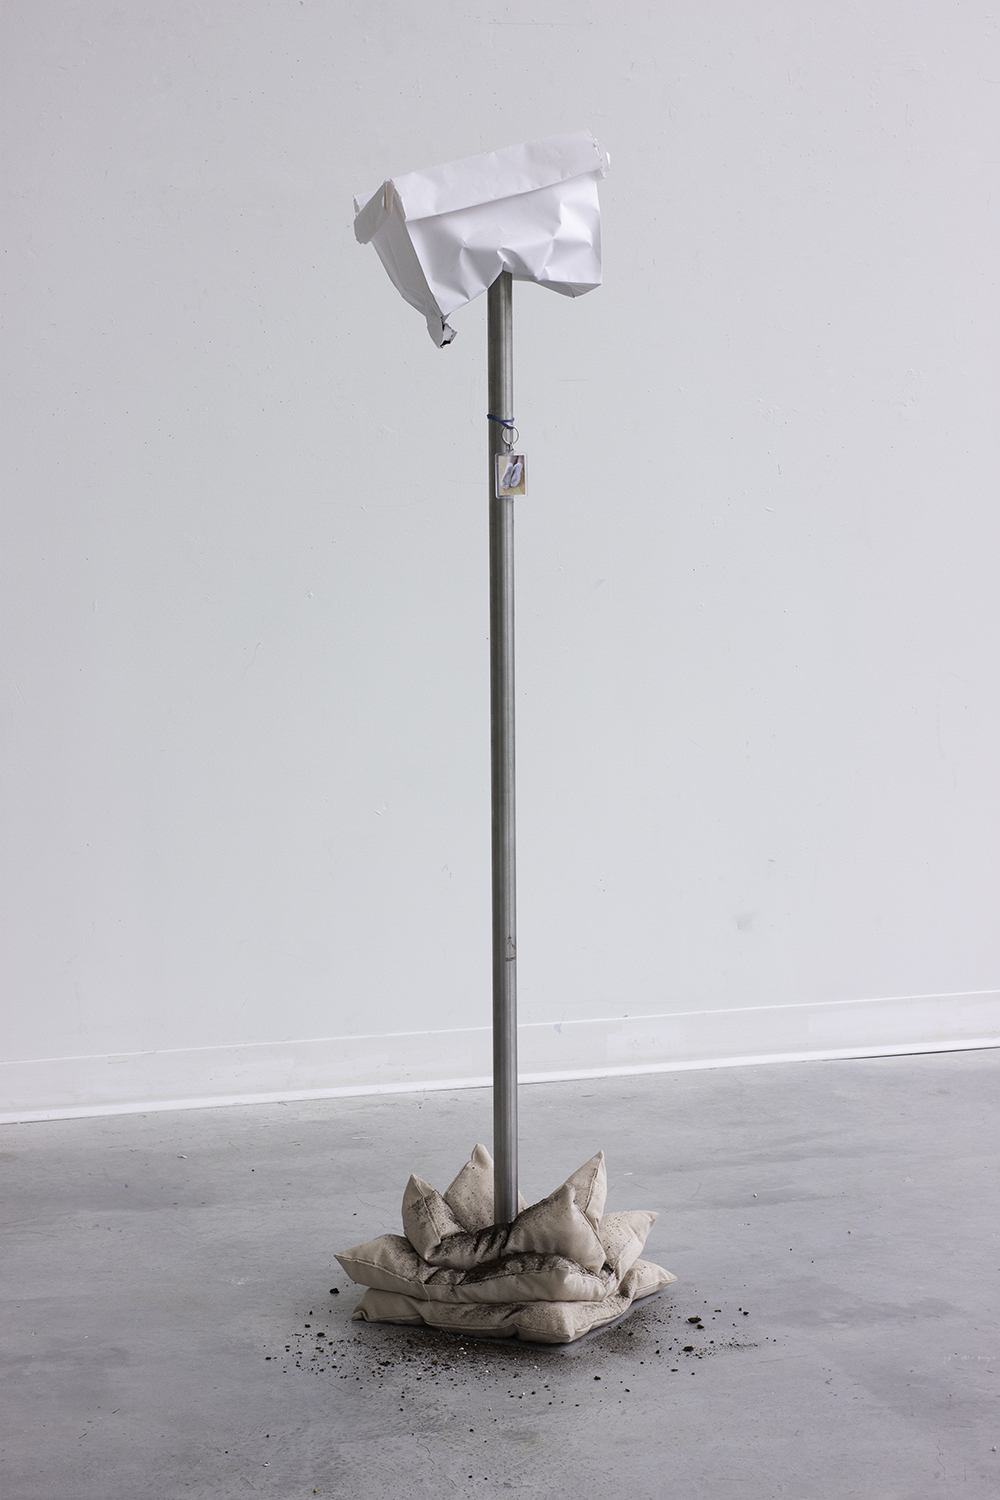 <i>Pole</i><br> Steel, paper bag, pillows, soil, keychain, digital photograph, 60 x 12 x 12 in, 2021.